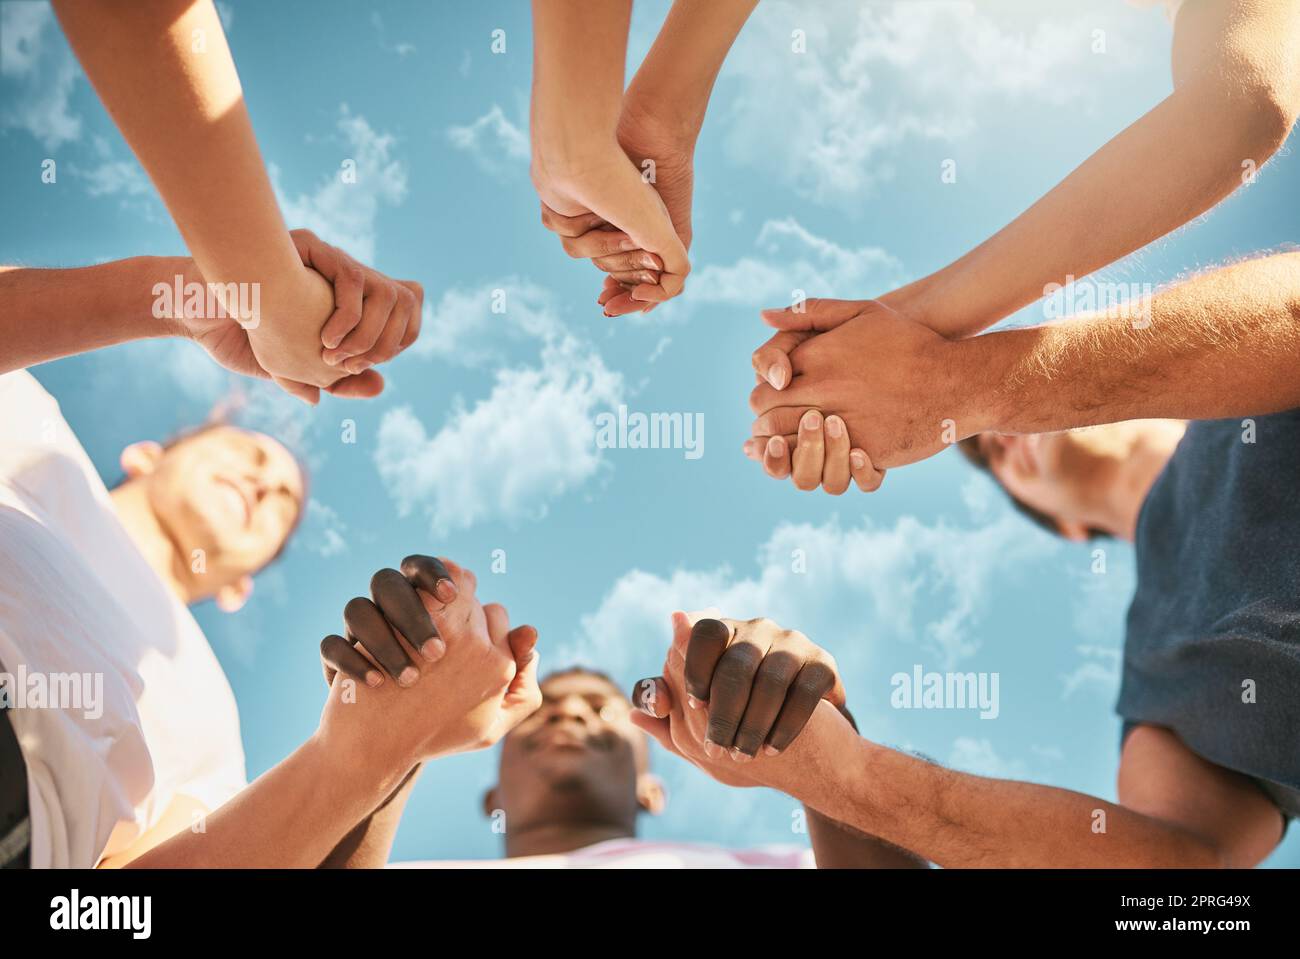 Strengthening friendship bonds. Low angle shot of a group of young friends holding hands. Stock Photo